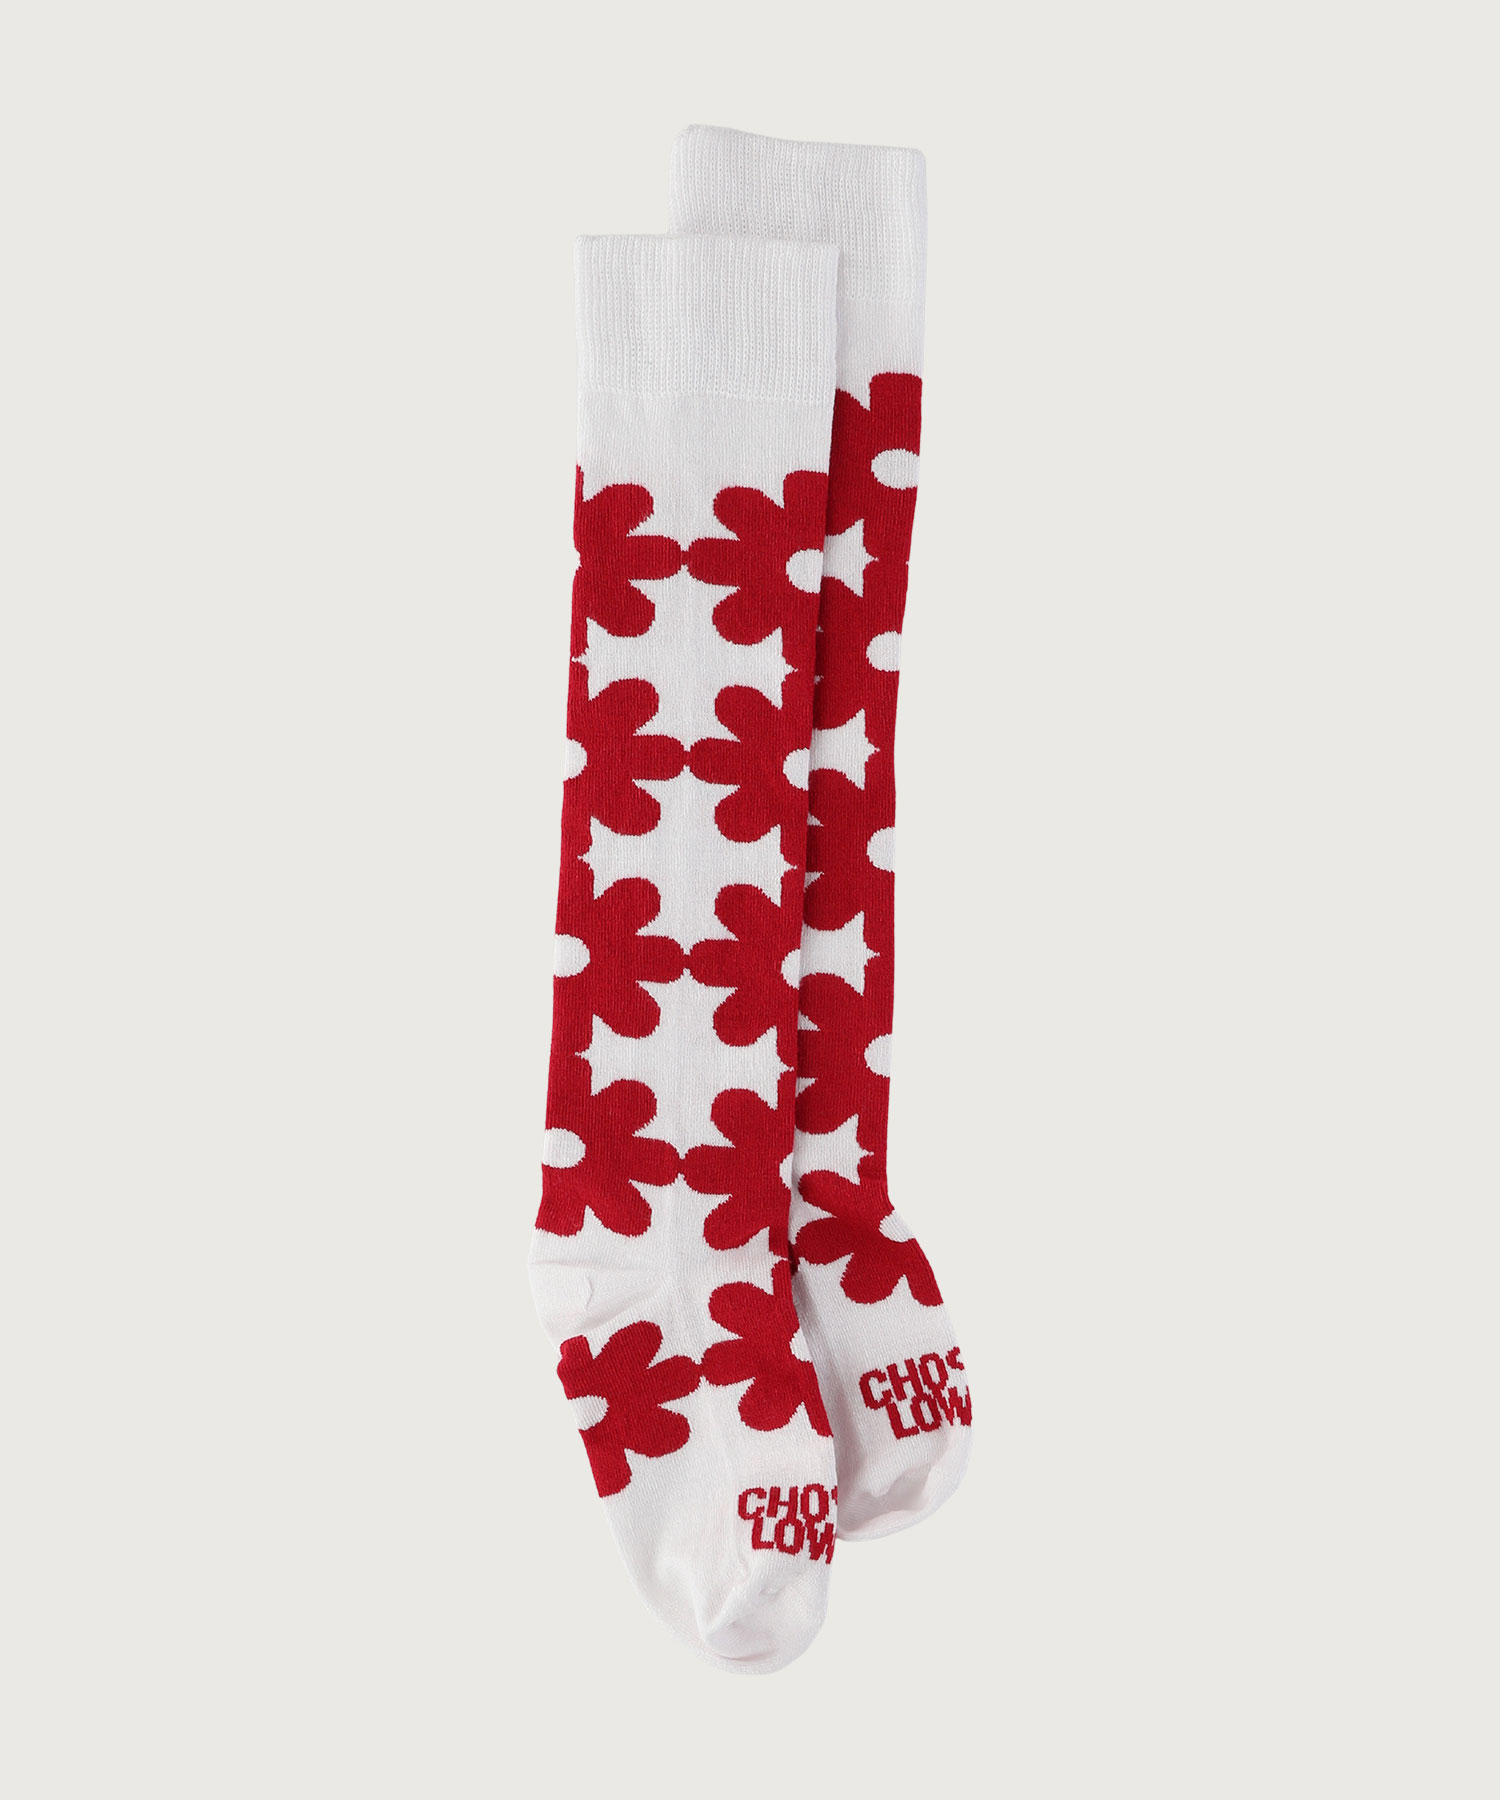 WHITE SOCKS WITH RED FLOWERS